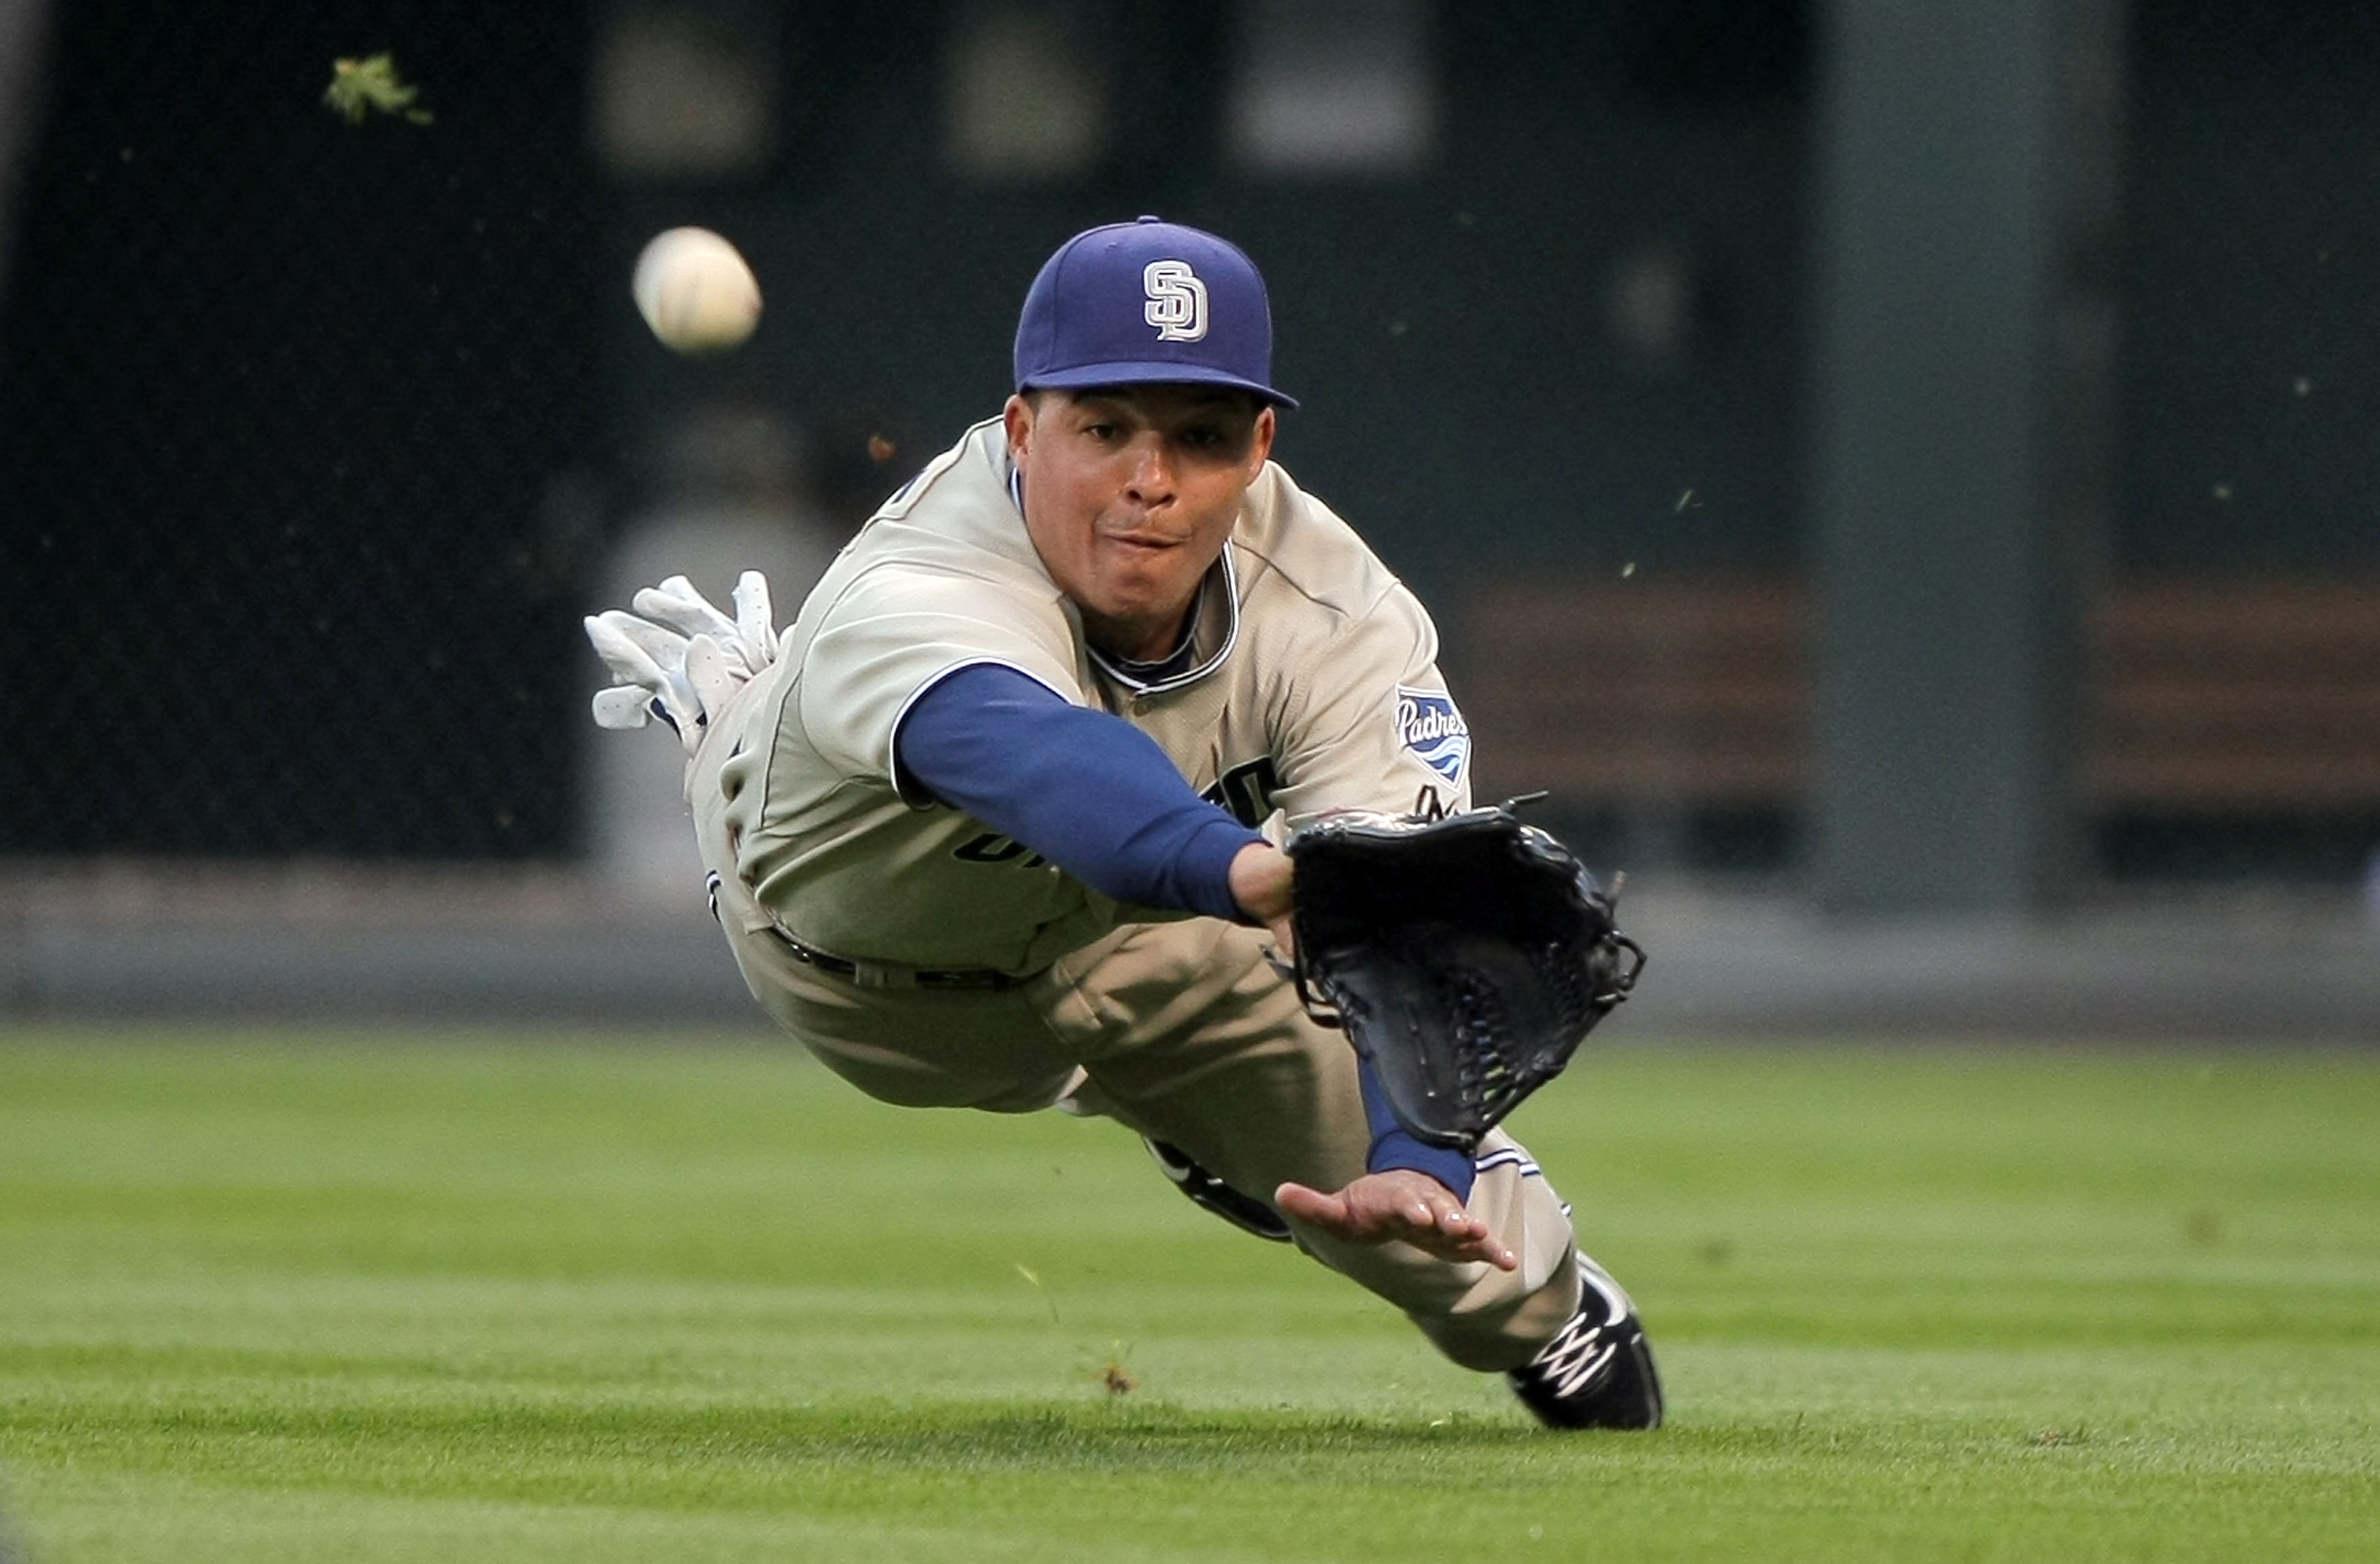 DENVER - APRIL 10:  Rightfielder Will Venable #25 of the San Diego Padres dives buts is unable to make a catch on a soft linedrive by Clint Barmes of the Colorado Rockies in the third inning during MLB action at Coors Field on April 10, 2010 in Denver, Co